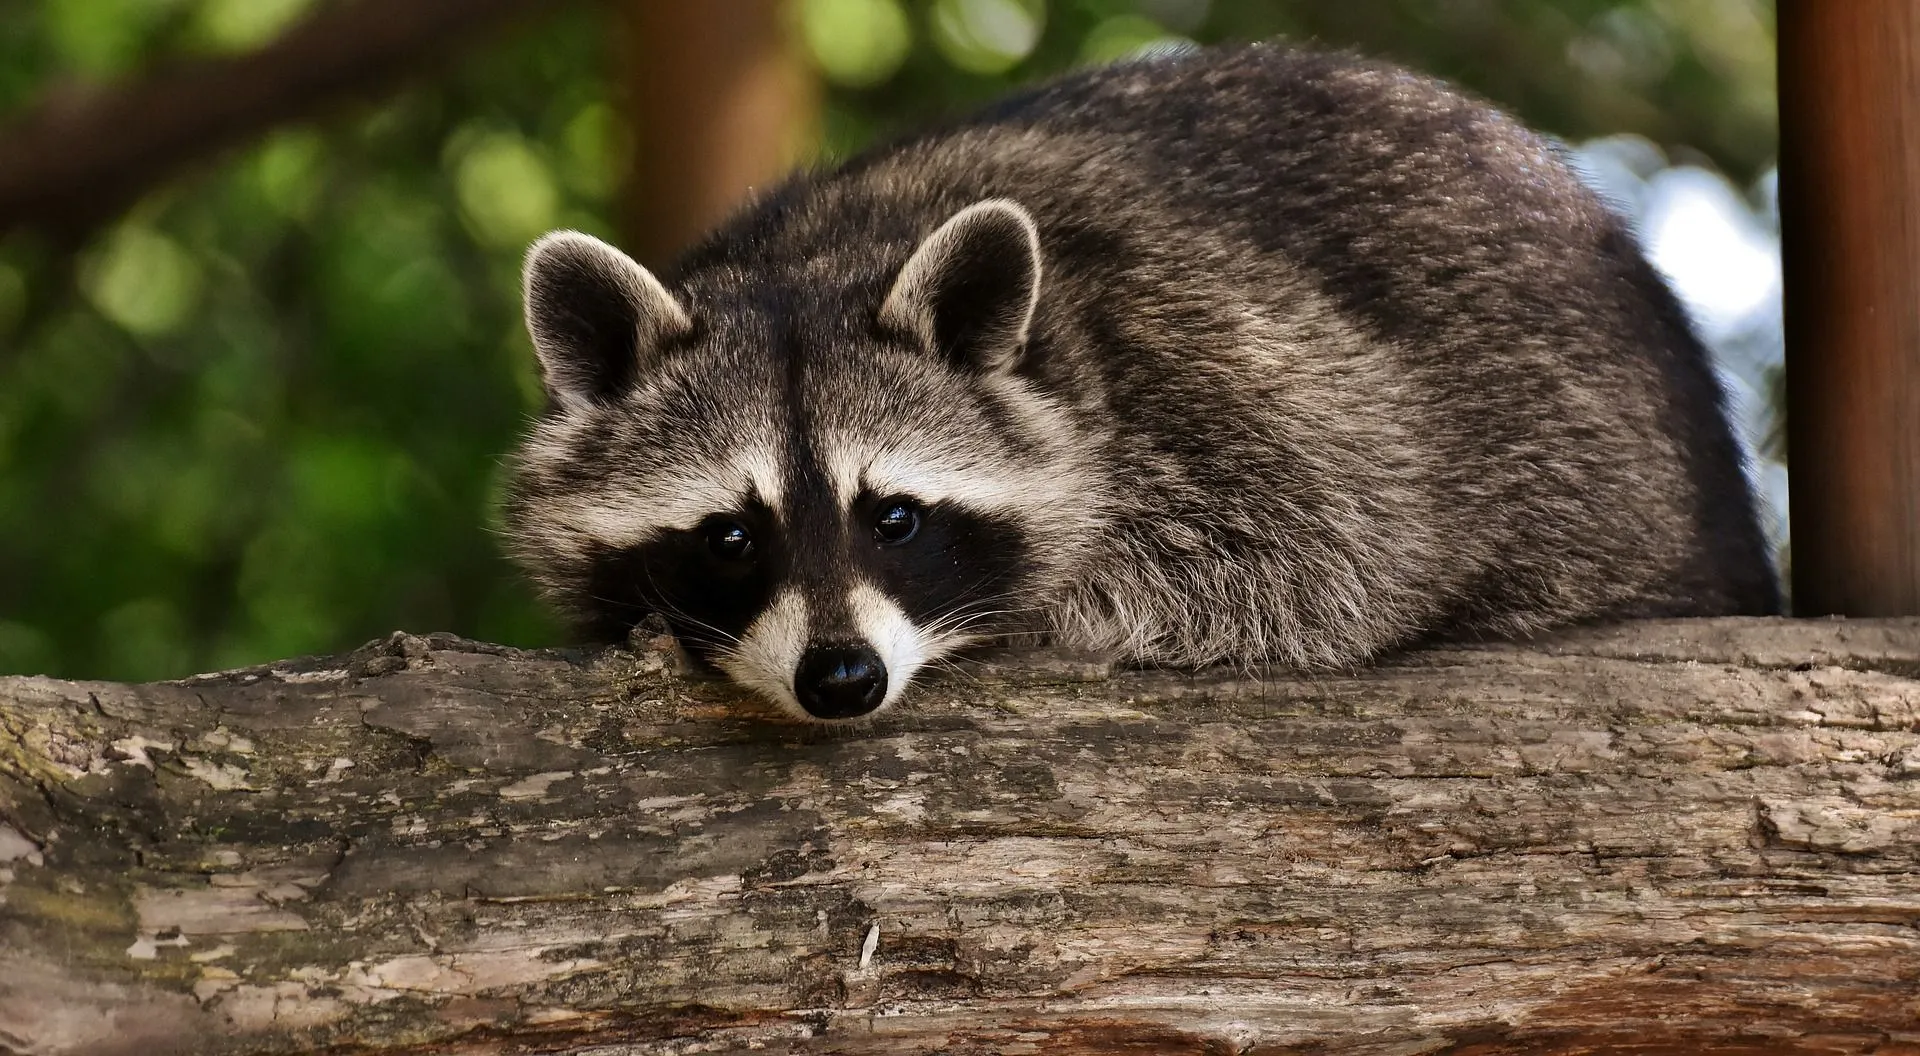 Raccoons' front paws do not have opposable thumbs like other primate animal species.